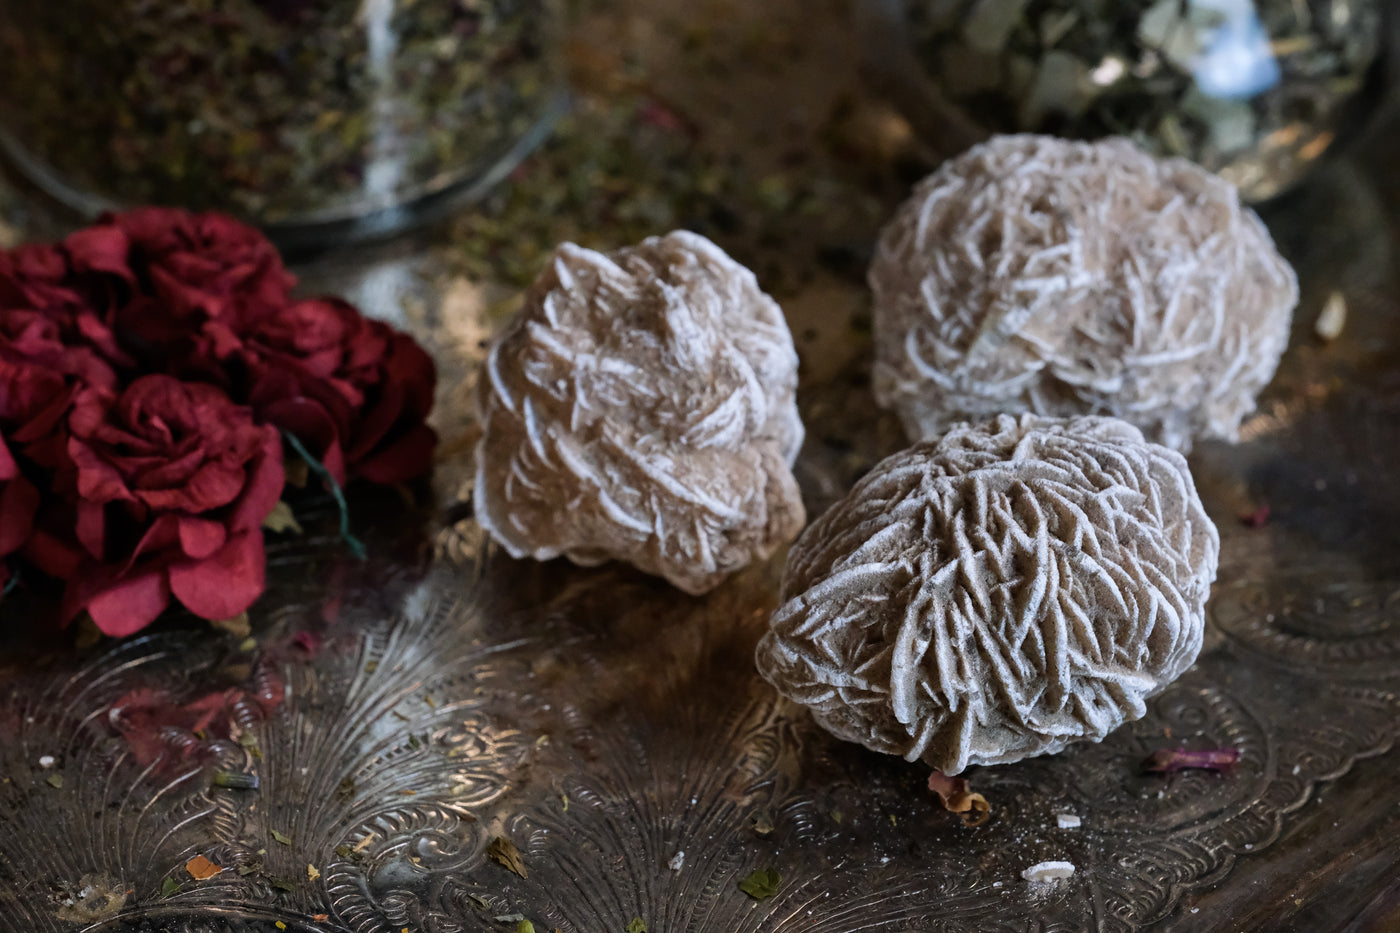 Three desert rose crystals displayed next to a red rose.